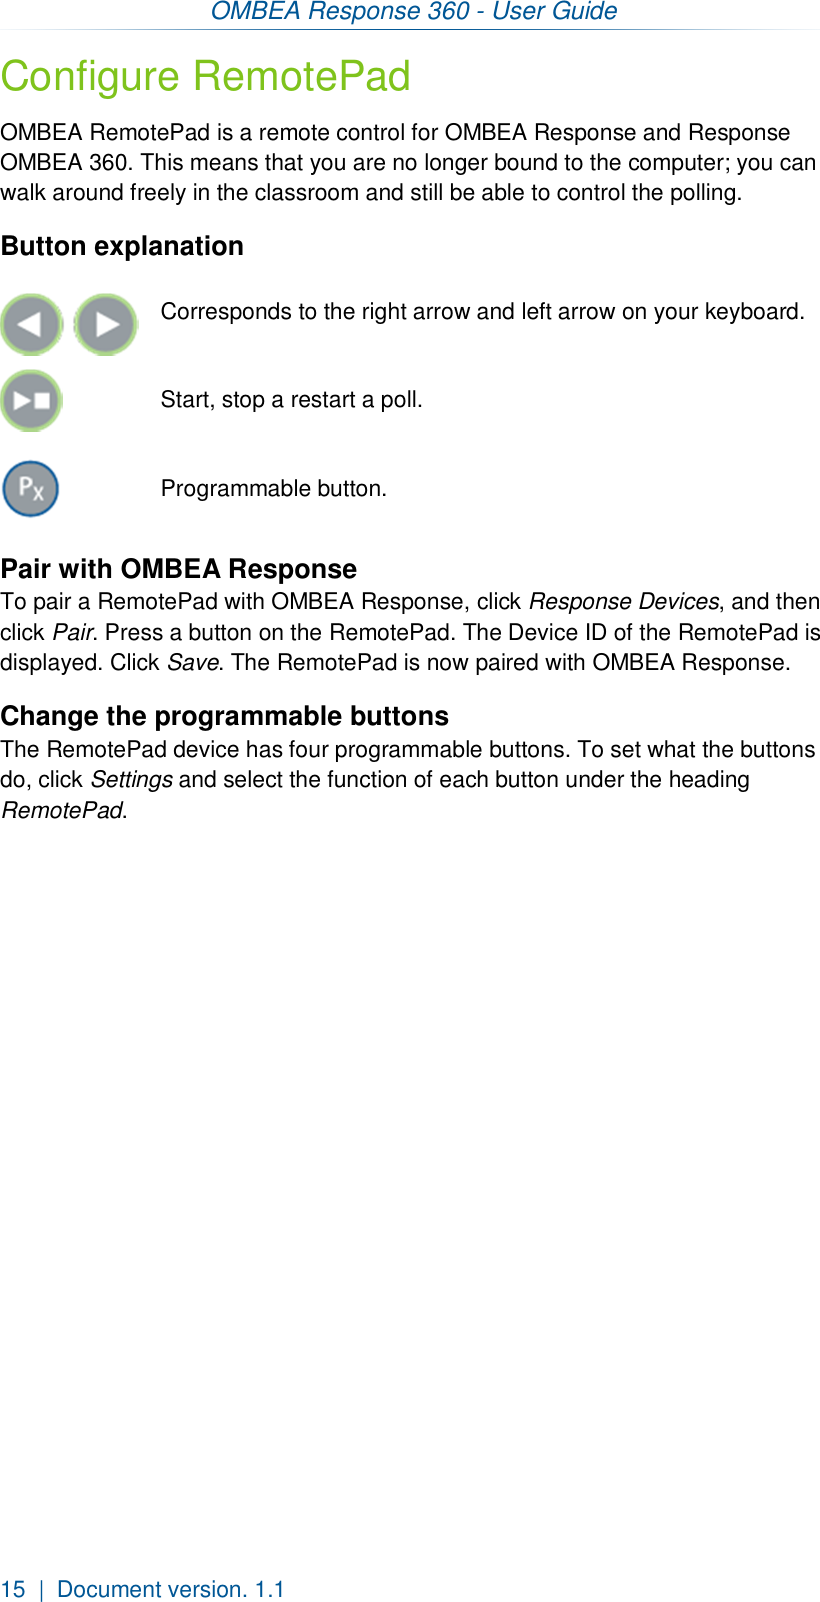 OMBEA Response 360 - User Guide  15  |  Document version. 1.1 Configure RemotePad OMBEA RemotePad is a remote control for OMBEA Response and Response OMBEA 360. This means that you are no longer bound to the computer; you can walk around freely in the classroom and still be able to control the polling.   Button explanation     Corresponds to the right arrow and left arrow on your keyboard.   Start, stop a restart a poll.  Programmable button. Pair with OMBEA Response To pair a RemotePad with OMBEA Response, click Response Devices, and then click Pair. Press a button on the RemotePad. The Device ID of the RemotePad is displayed. Click Save. The RemotePad is now paired with OMBEA Response. Change the programmable buttons The RemotePad device has four programmable buttons. To set what the buttons do, click Settings and select the function of each button under the heading RemotePad.  